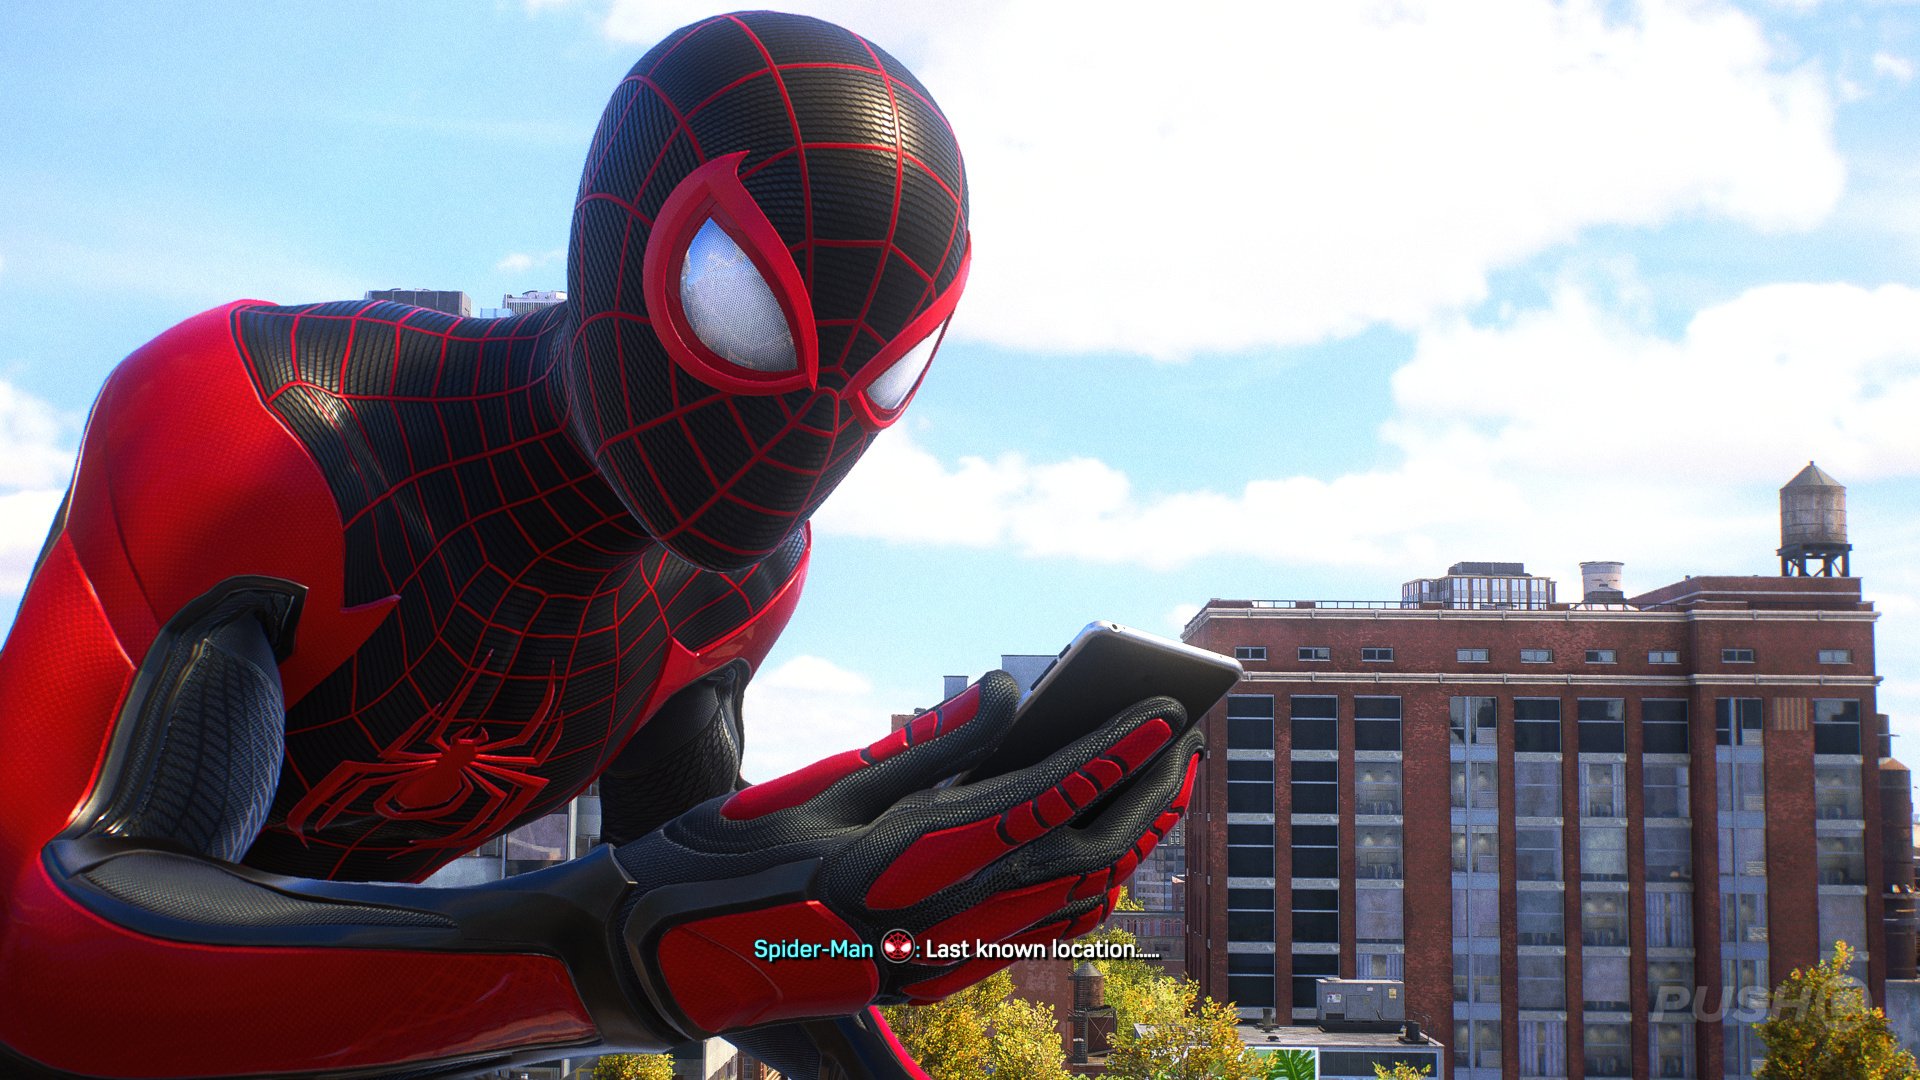 Marvel's Spider-Man 2 review: The rare game that's both bigger and